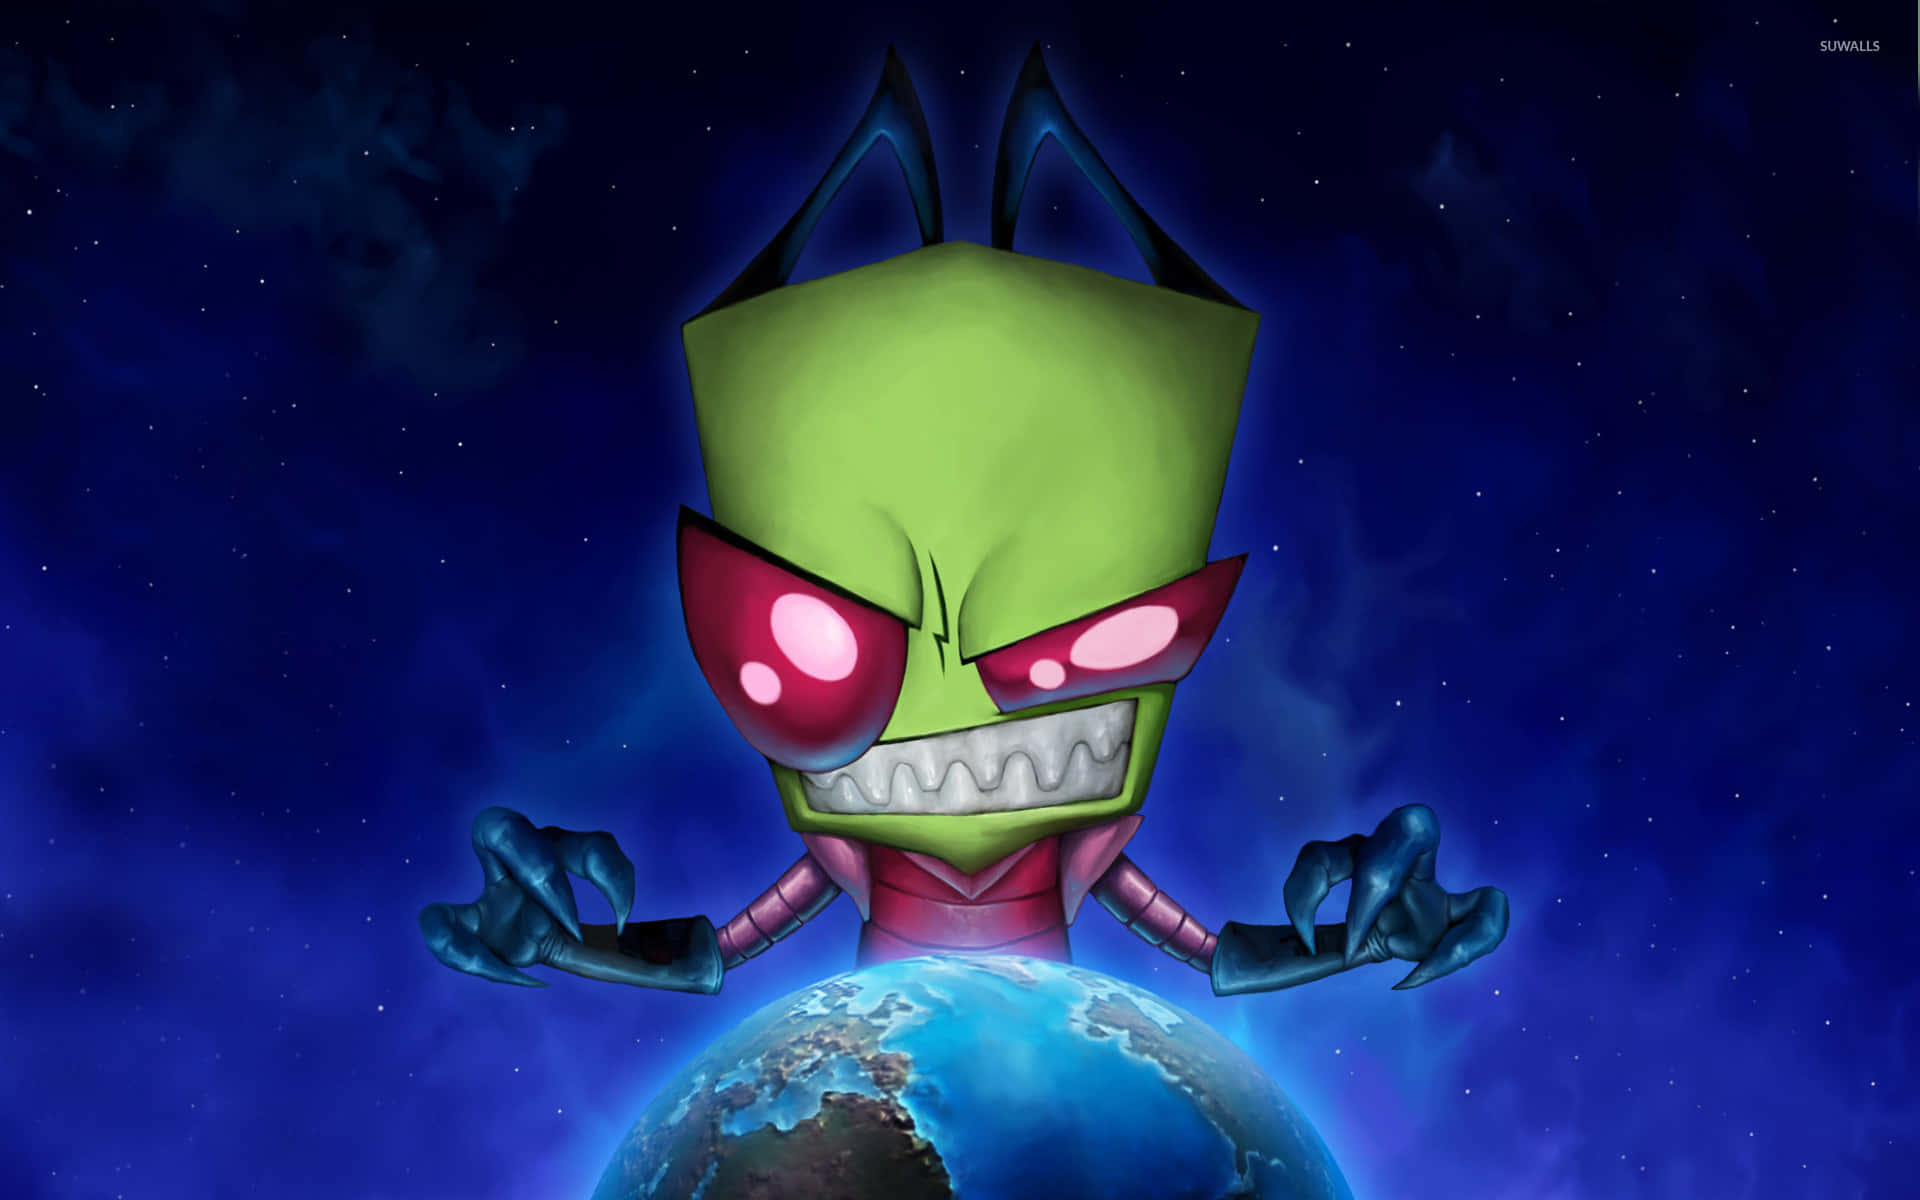 "Invader Zim Ready To Conquer"